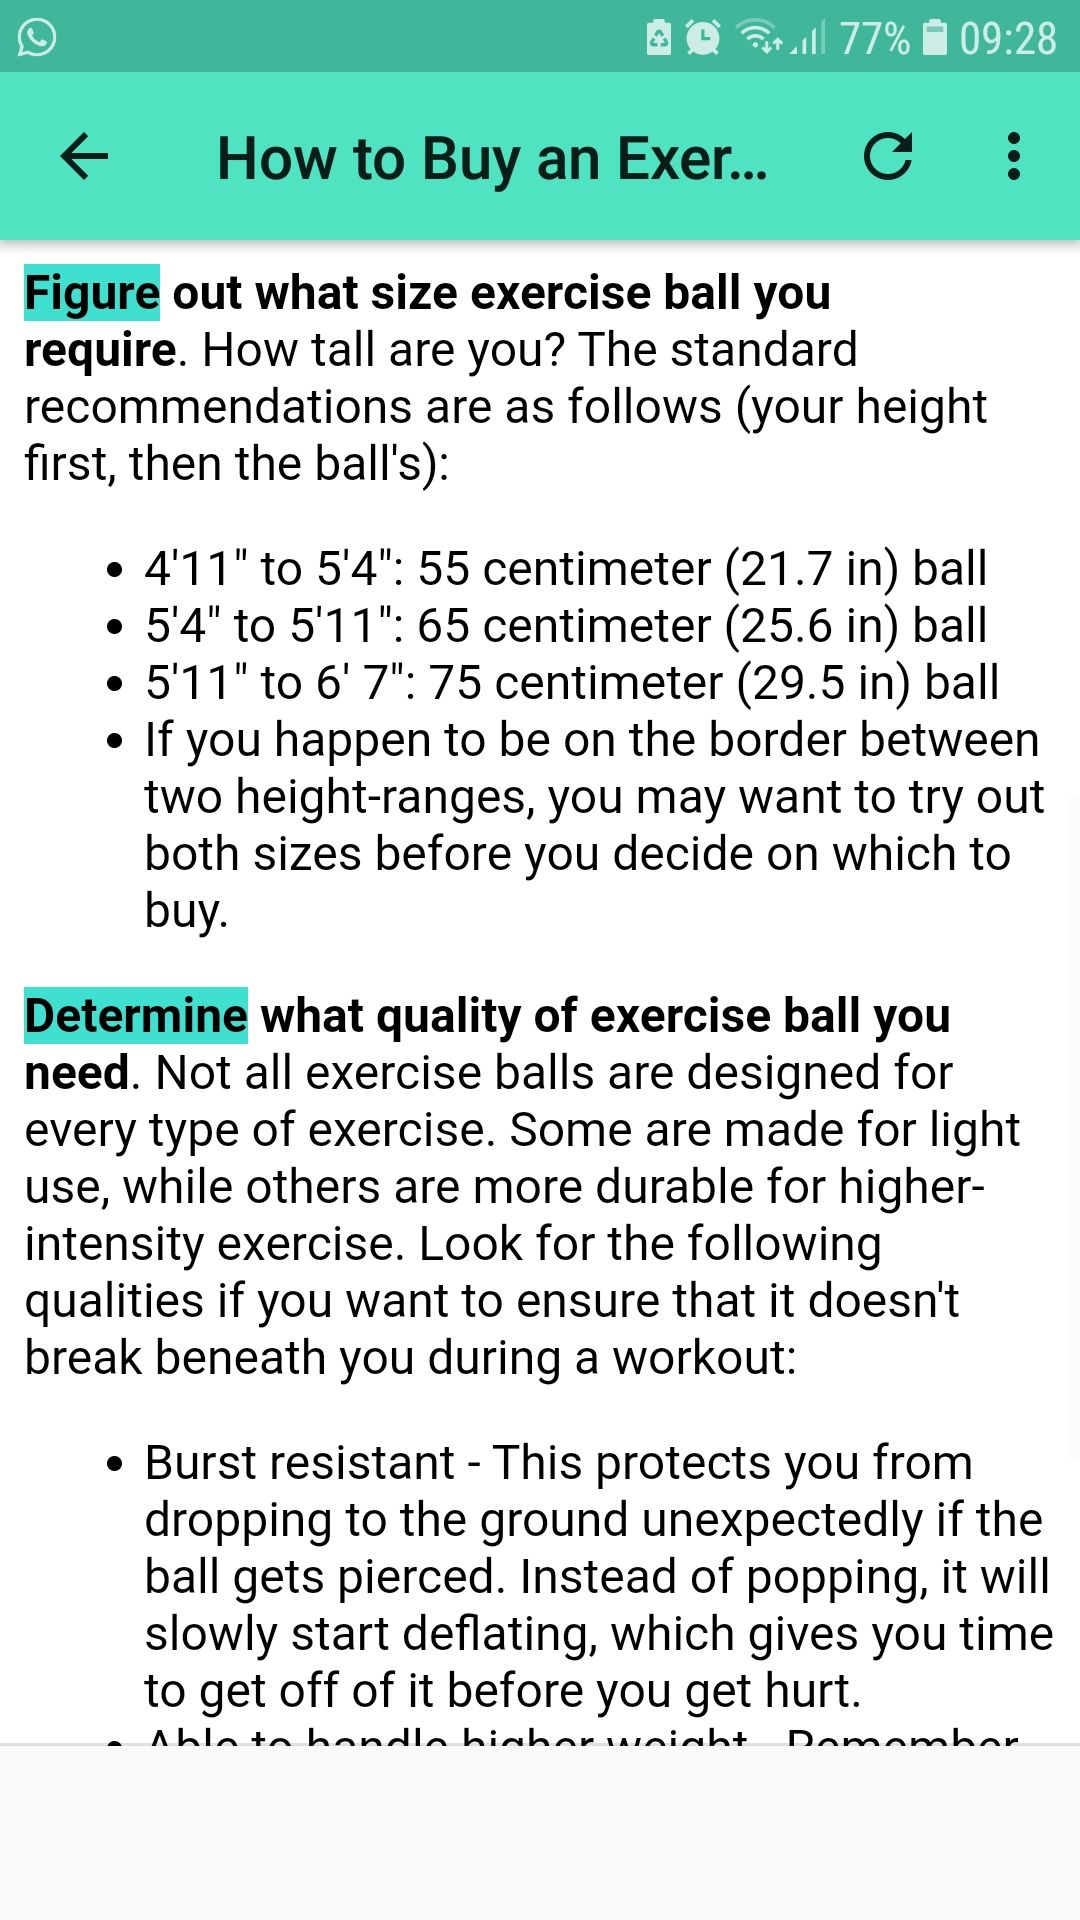 Stability Ball Exercises mobile fitness app how to